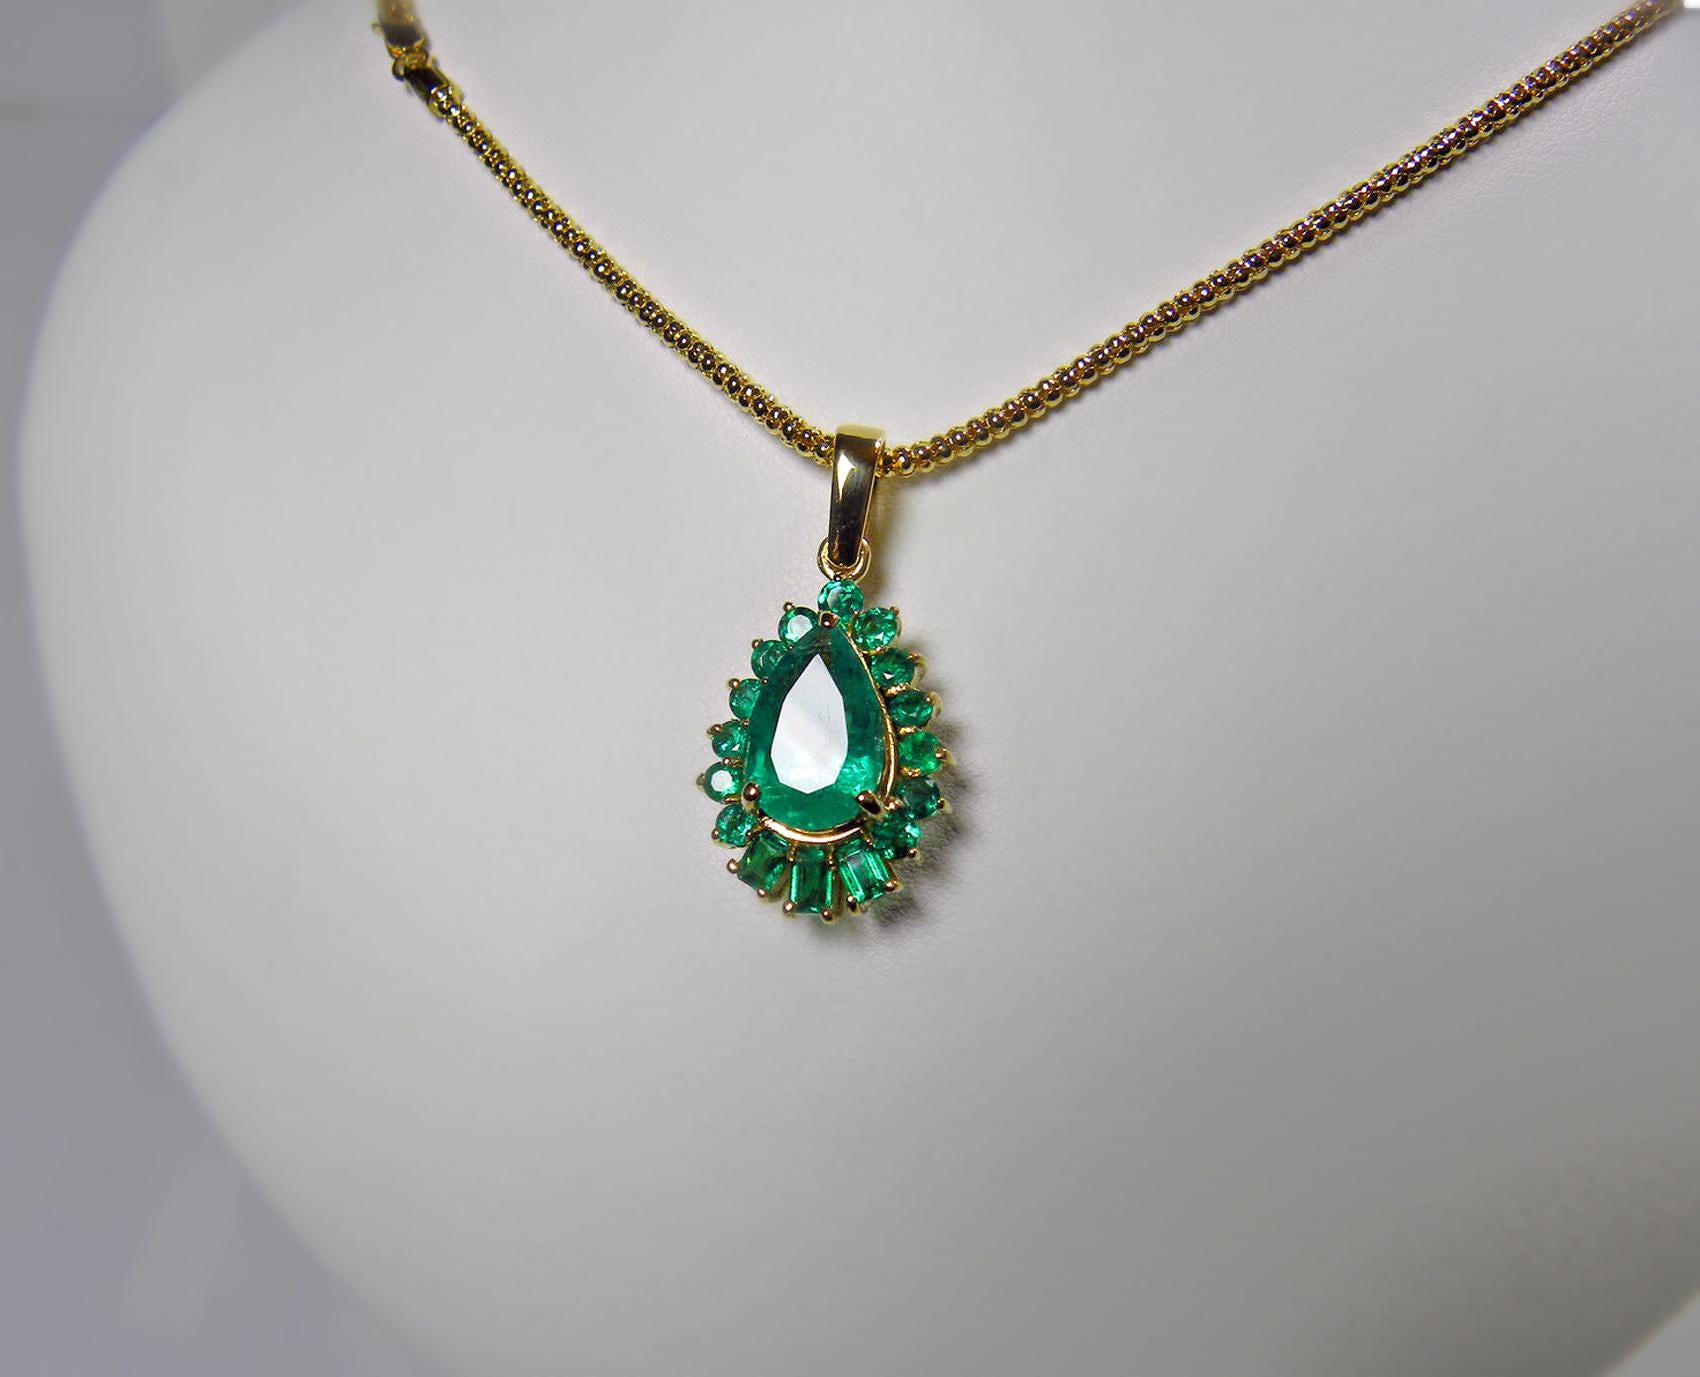 This is a 5.20-carat vibrant AAA green natural Colombian emerald drop pendant necklace crafted in 18K yellow gold. The center emerald is a pear cut weighing over 4.0 carats and is surrounded by 1.20 carats of emeralds. The pendant measurements are